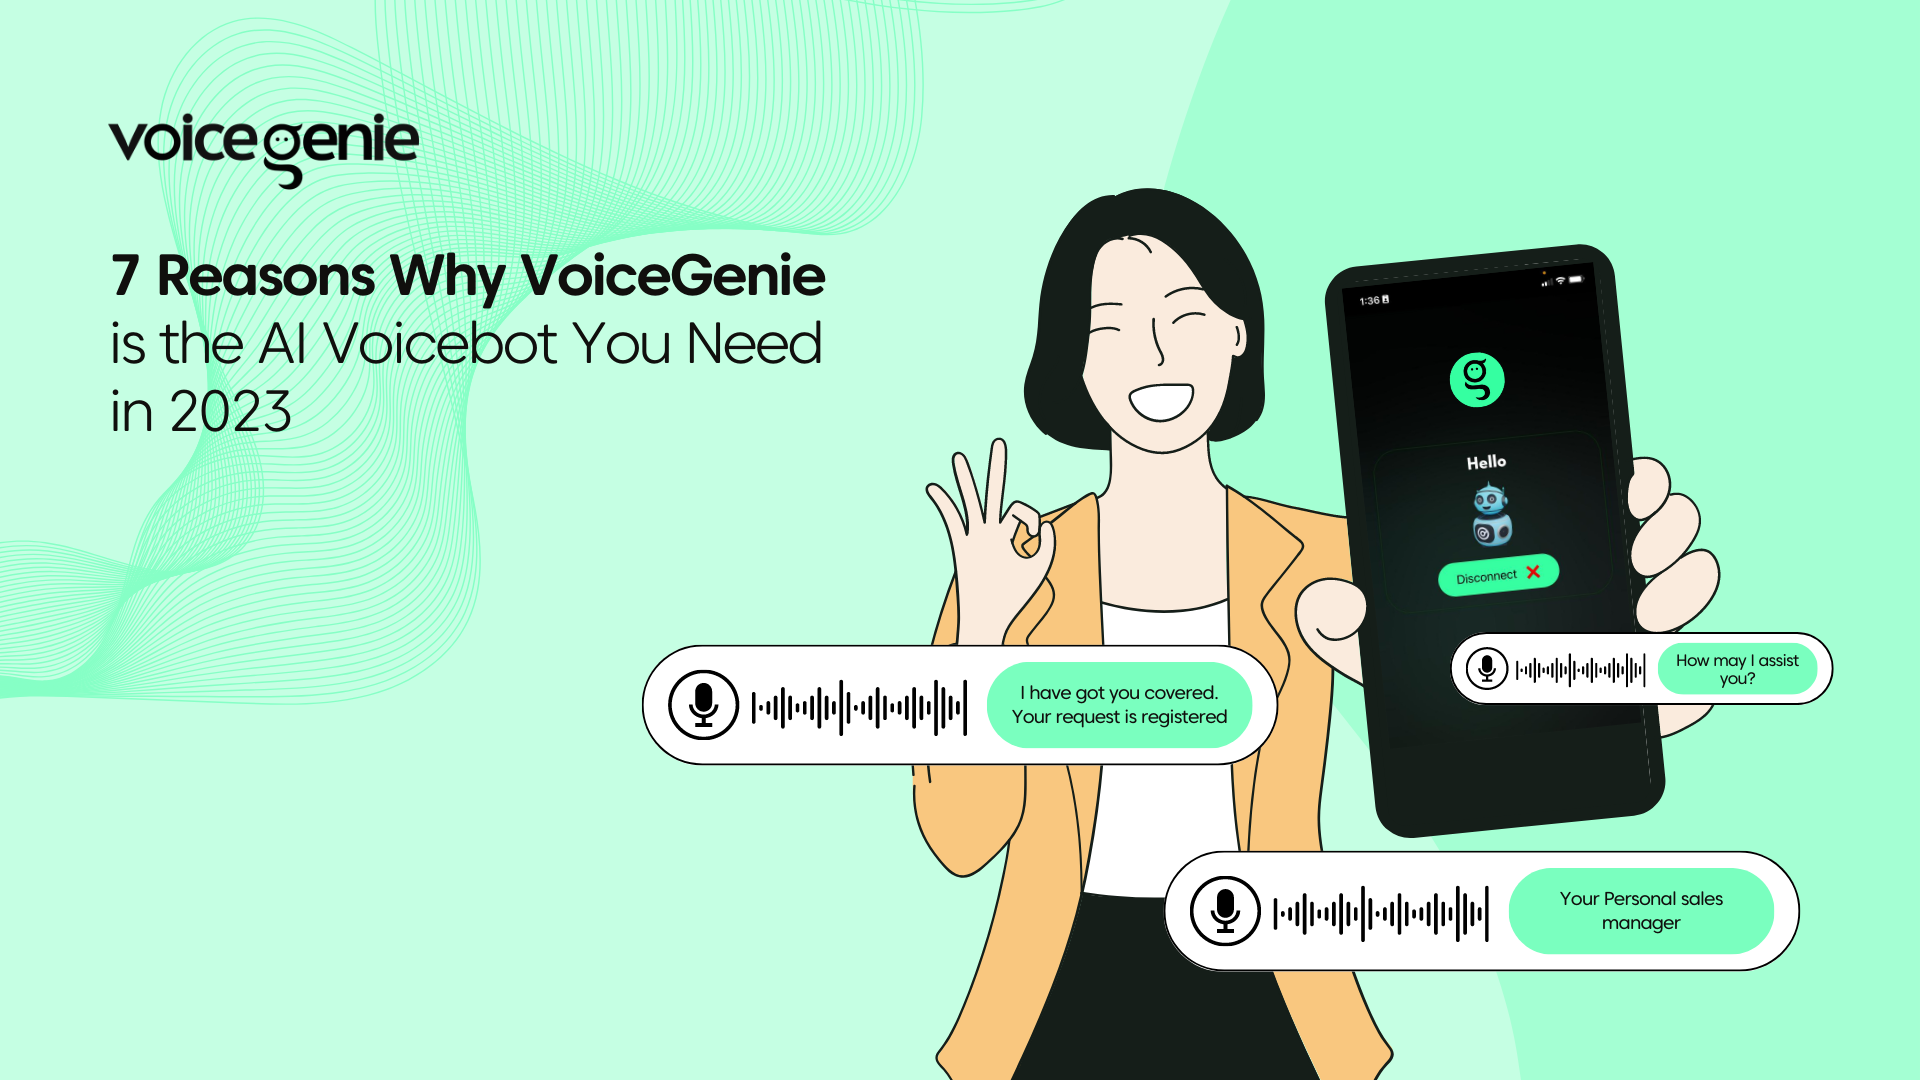 7 reasons why it's the Voice AI you need in 2023